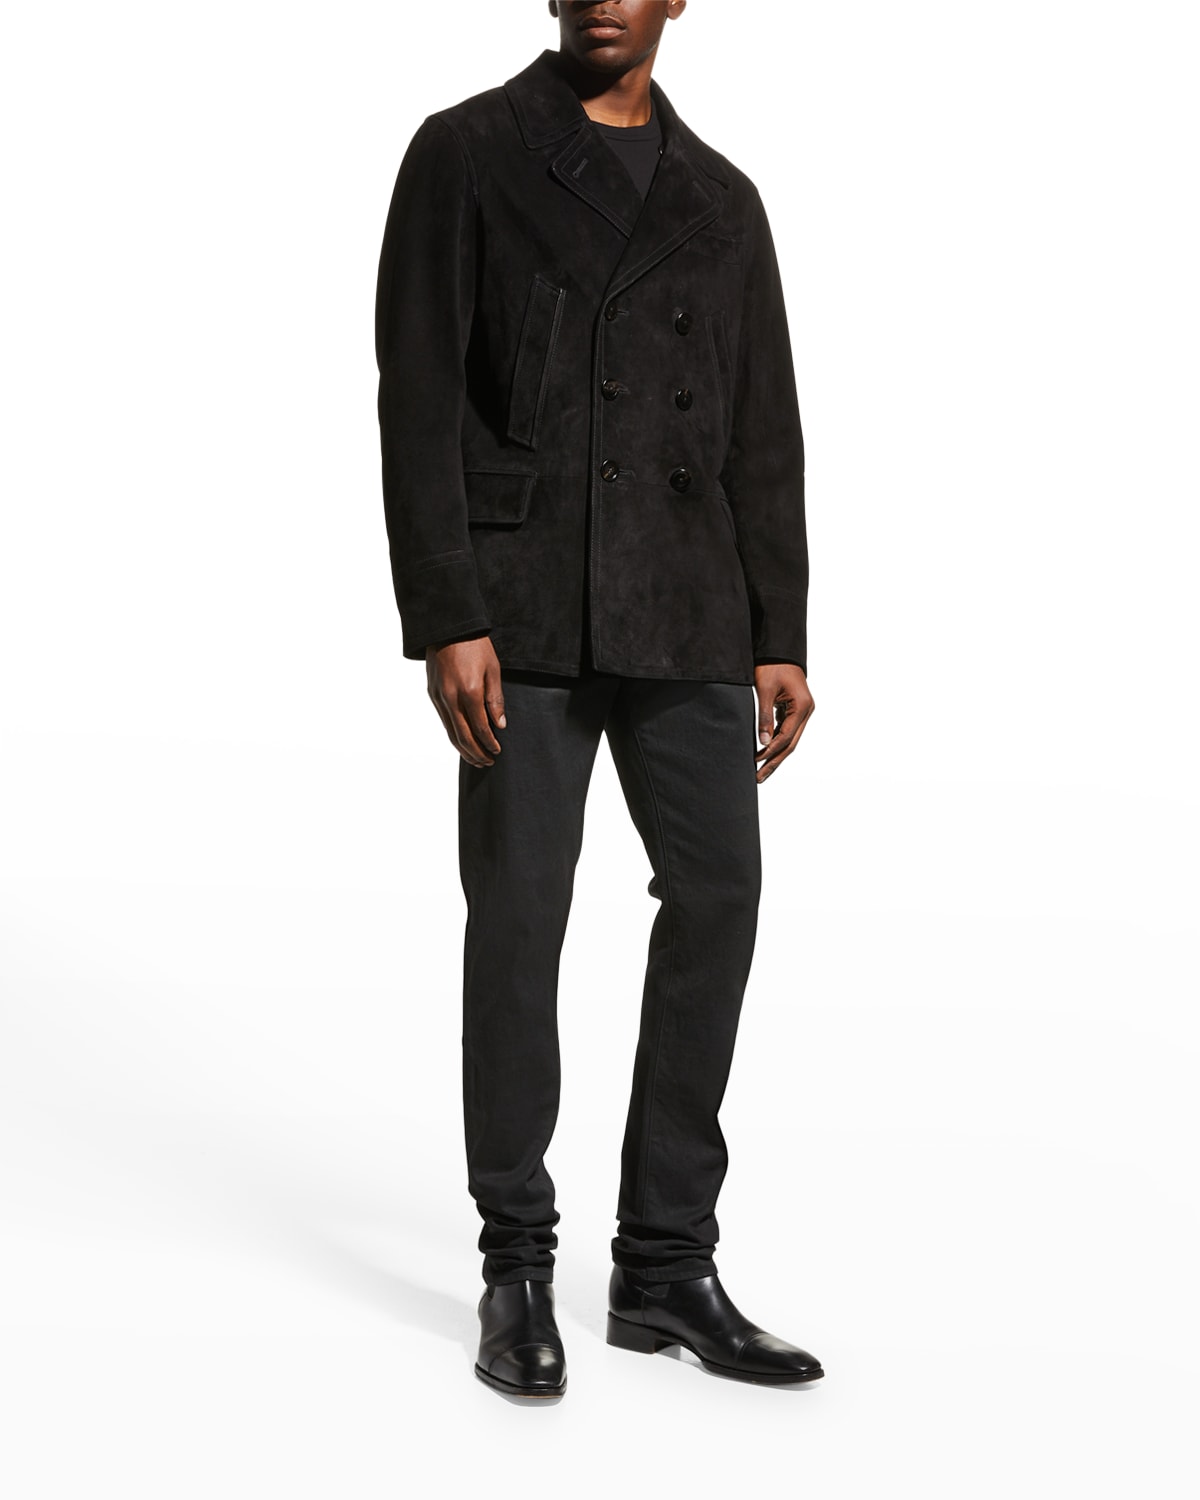 Tom Ford Men's Suede-leather Peacoat